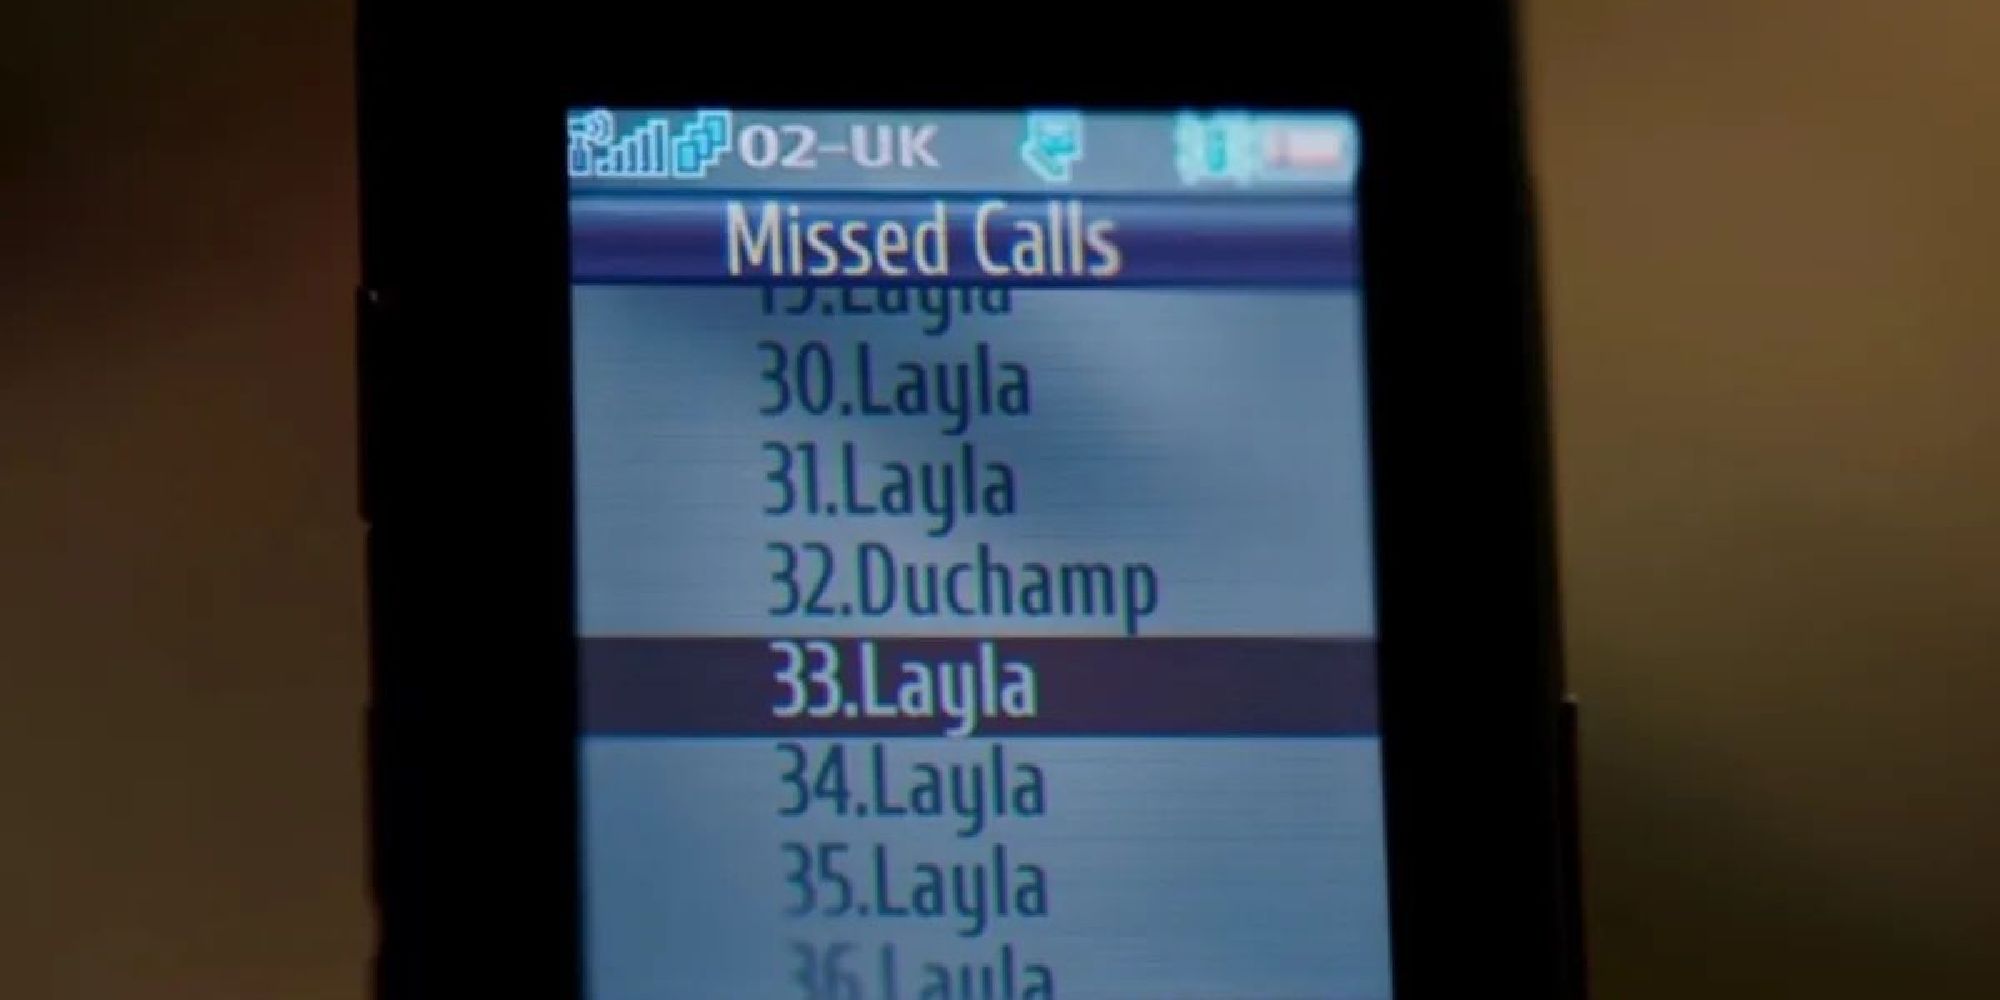 Marc Spector's phone's missed calls from Layla and Duchamp